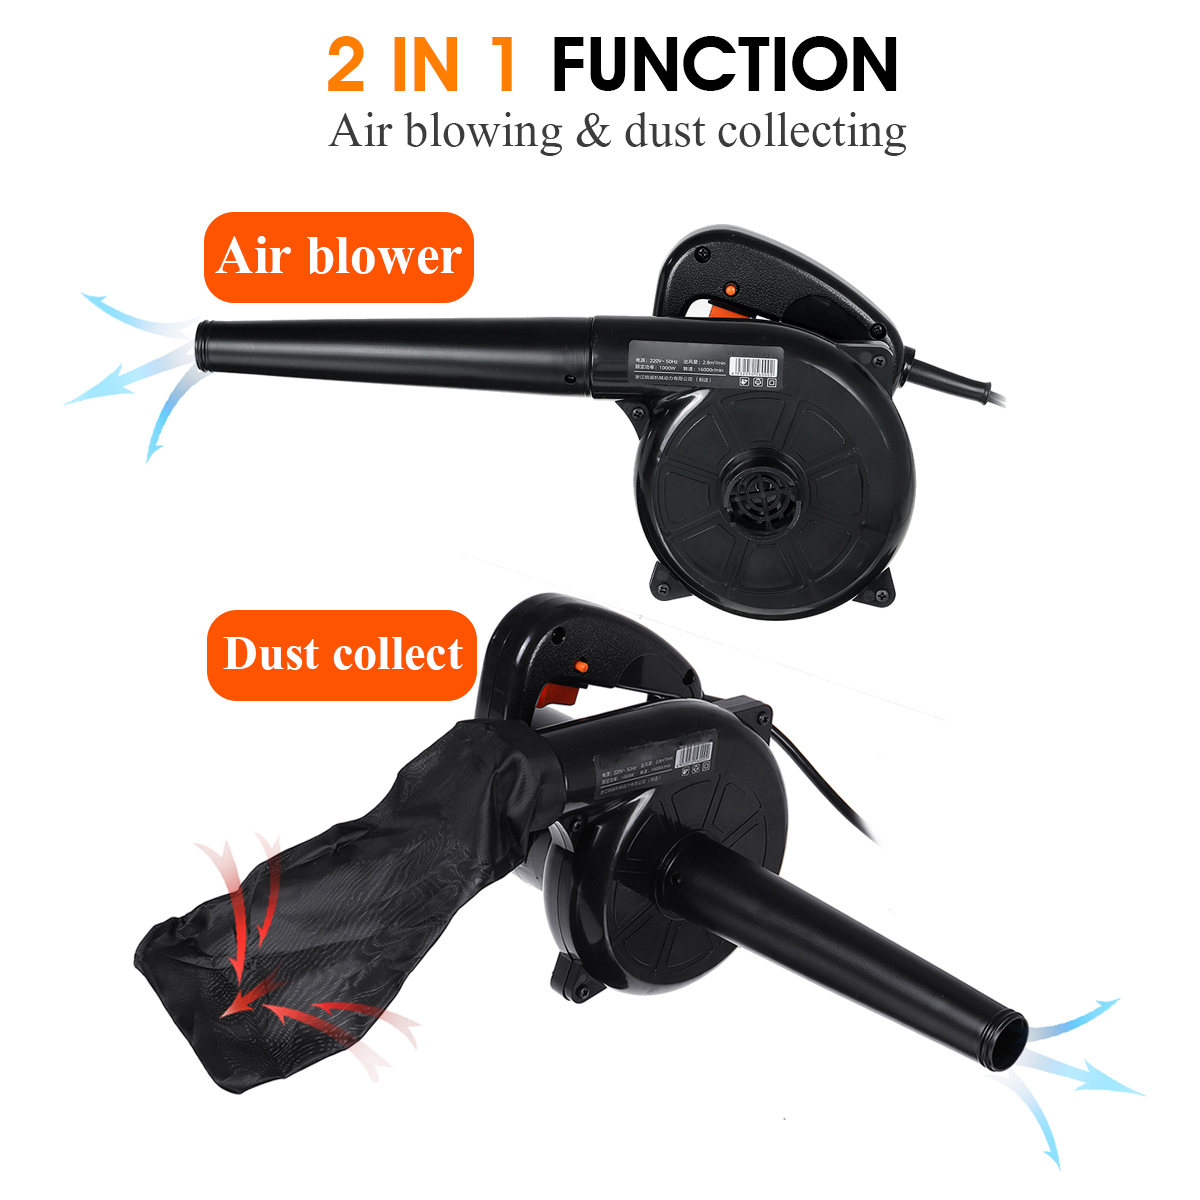 1000W-220V-2-in-1-Electric-Air-Blower-16000rmin-Handheld-Blowing--Dust-Collecting-Mechine-1735961-3